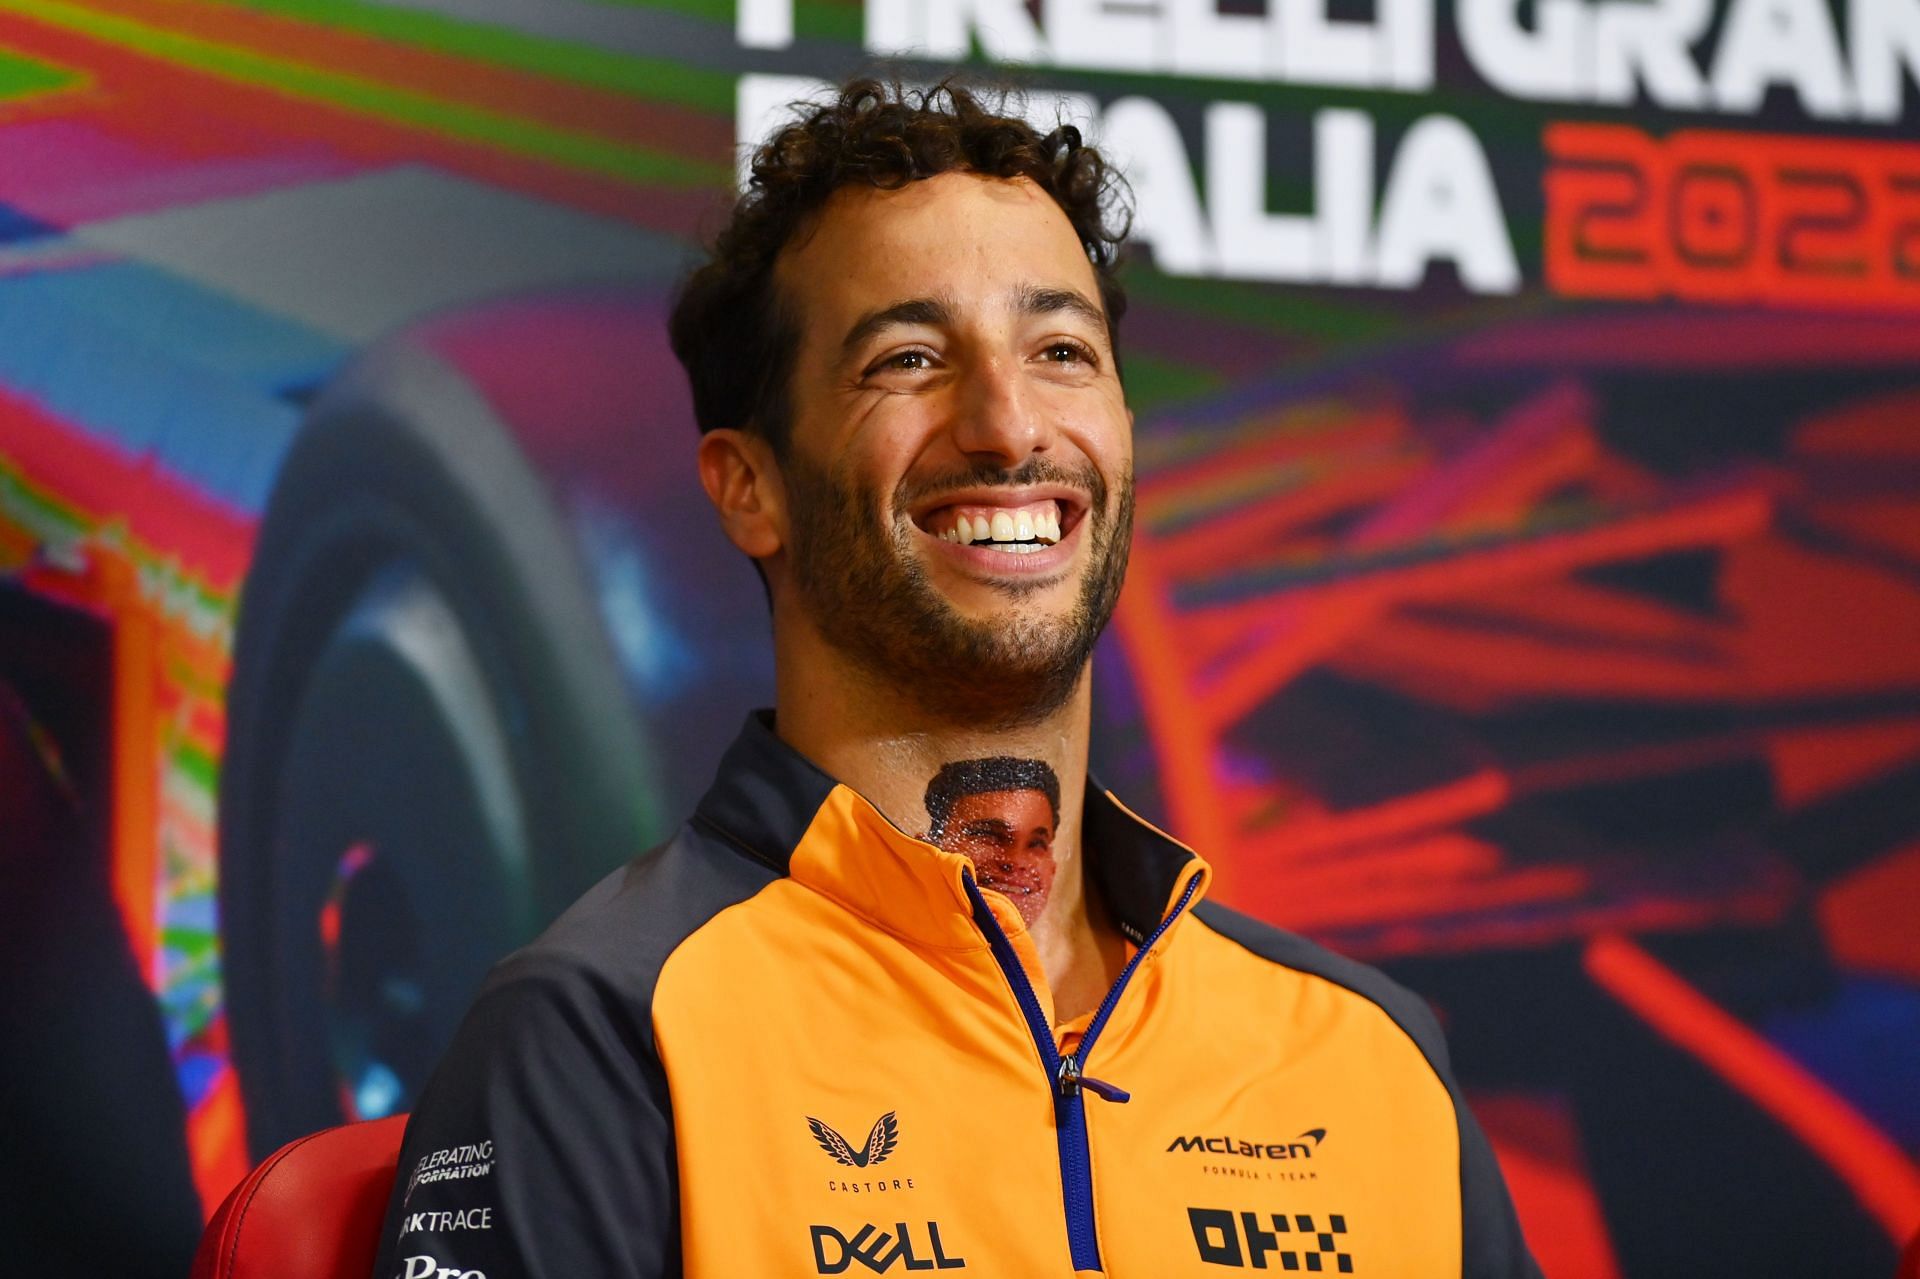 F1 Grand Prix of Italy - Previews Daniel Ricciardo of Australia and McLaren shows a fake tattoo of Lando Norris of Great Britain and McLaren on his neck during the drivers press conference during previews ahead of the F1 Grand Prix of Italy at Autodromo Nazionale Monza on September 08, 2022 in Monza, Italy. (Photo by Dan Mullan/Getty Images)